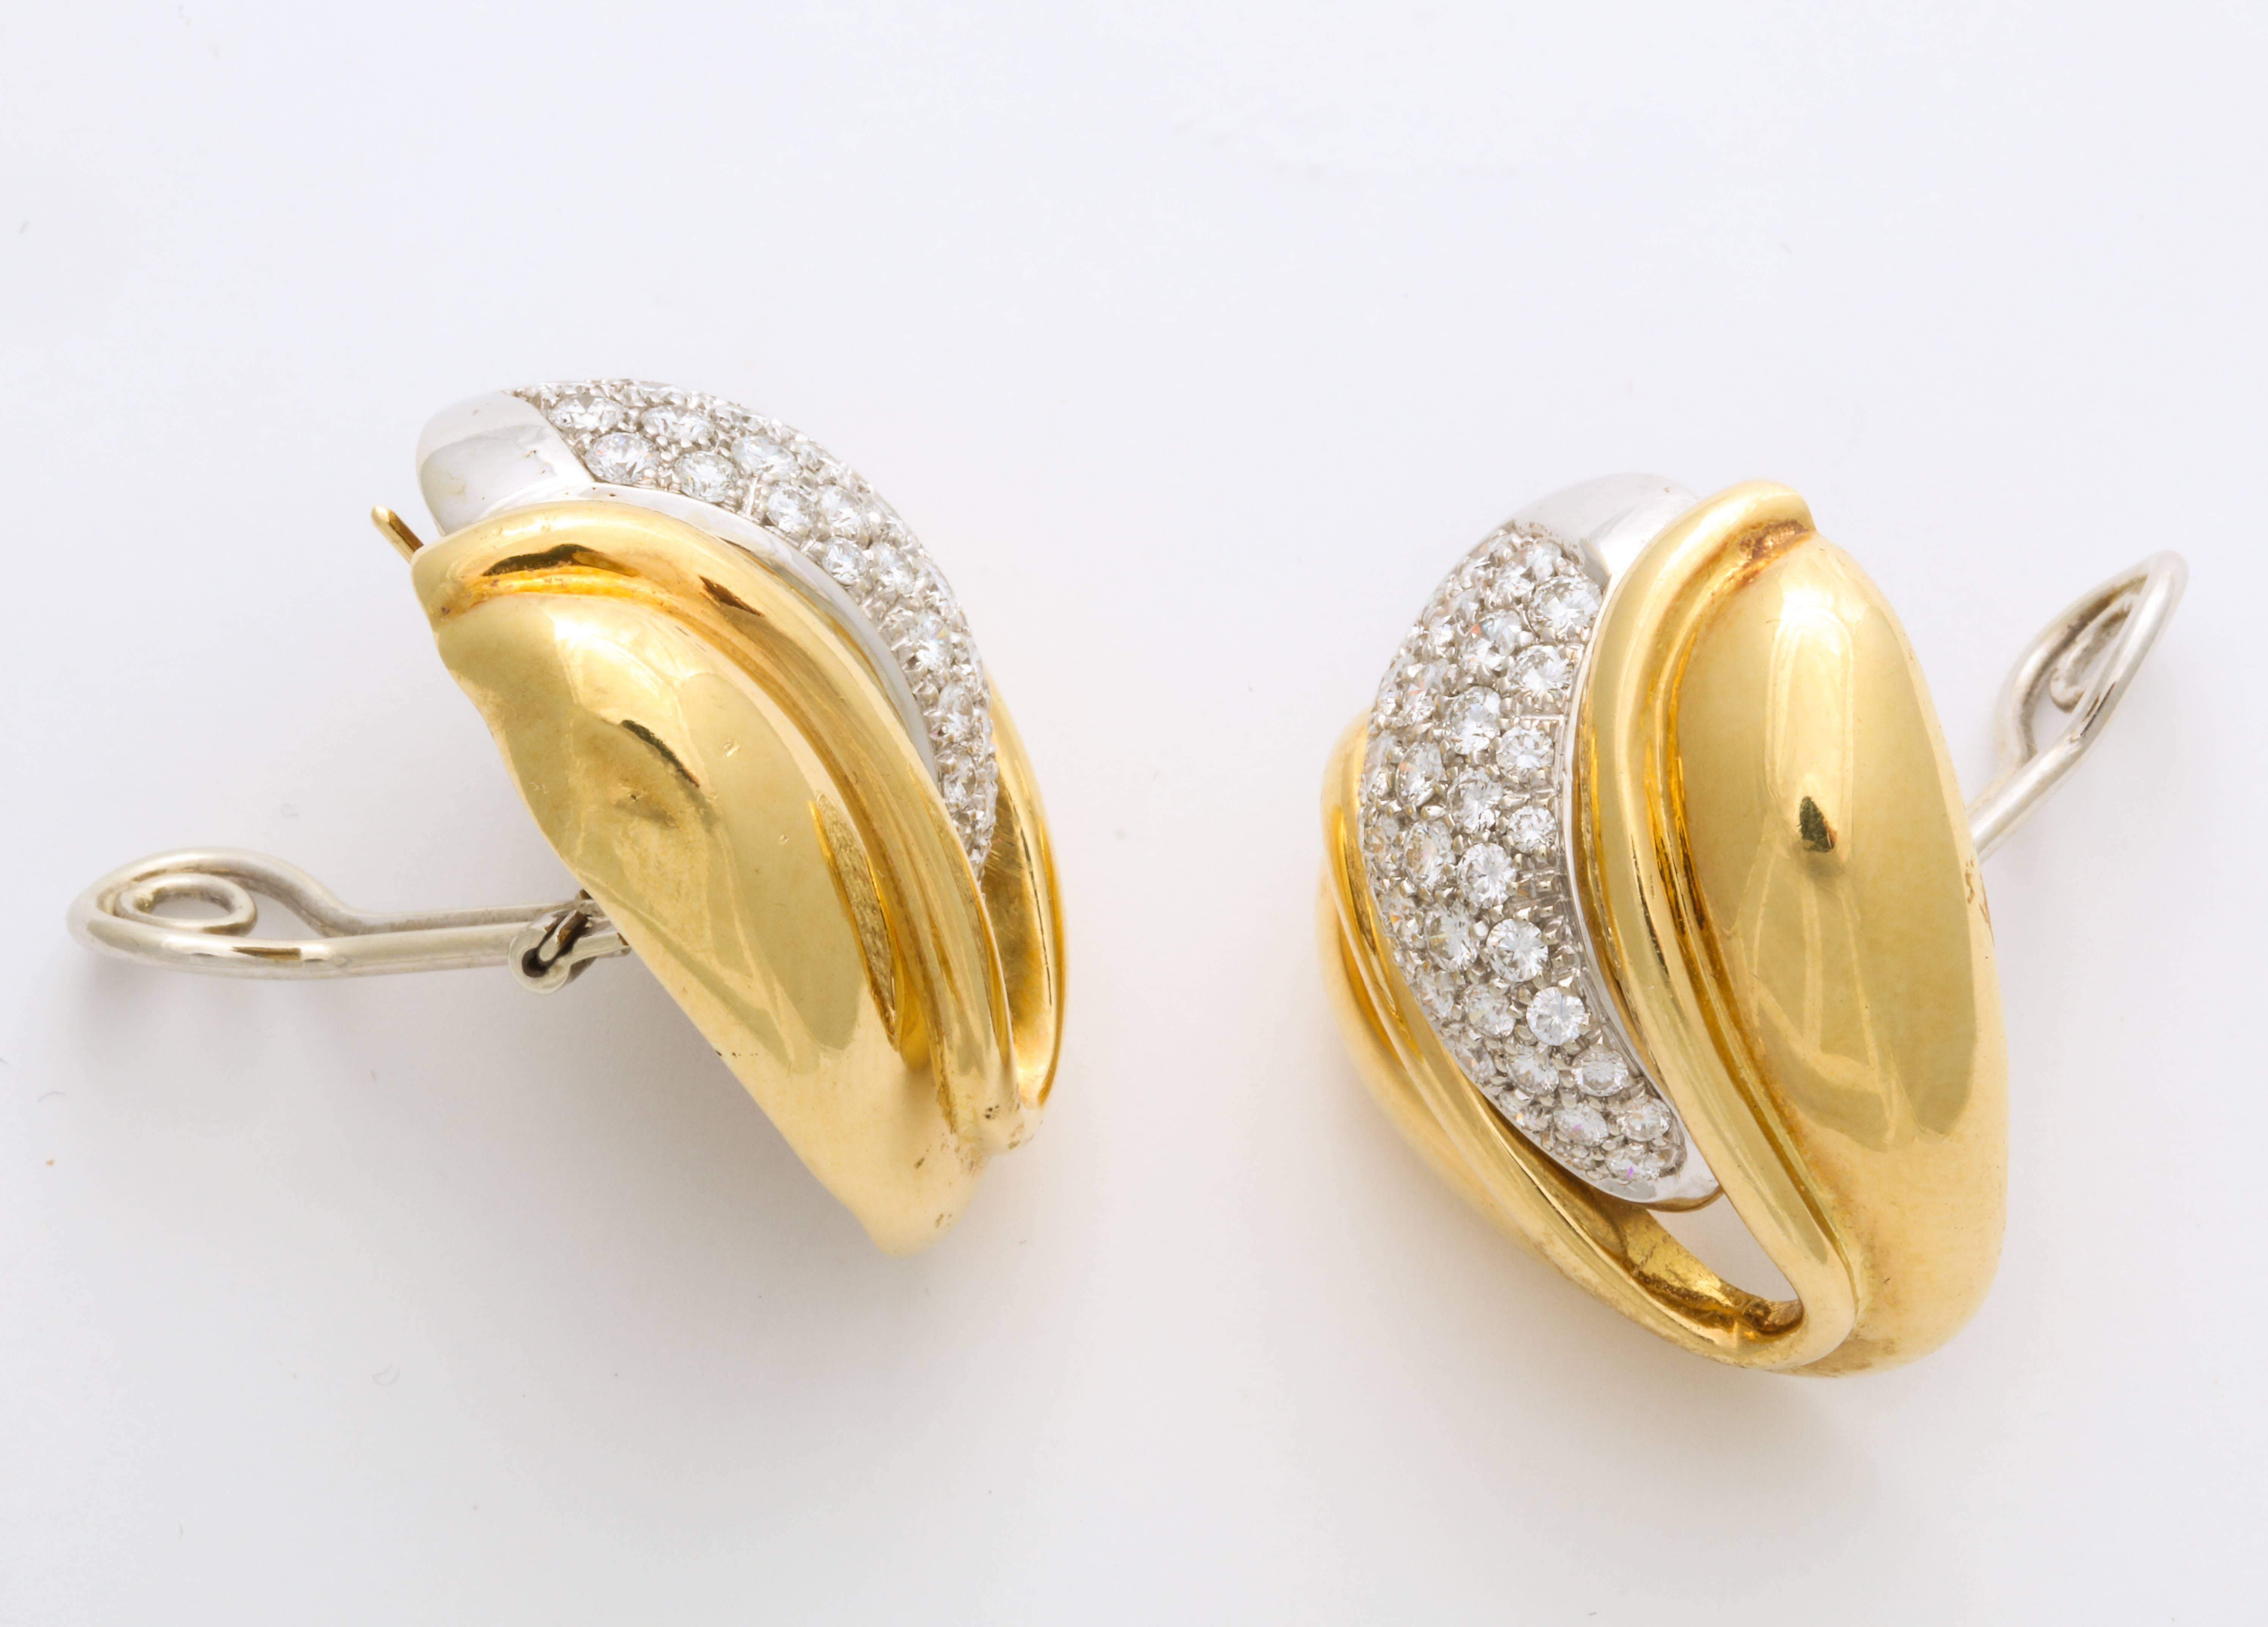  Diamond and Gold Petal Form clip Earrings In Excellent Condition For Sale In New York, NY